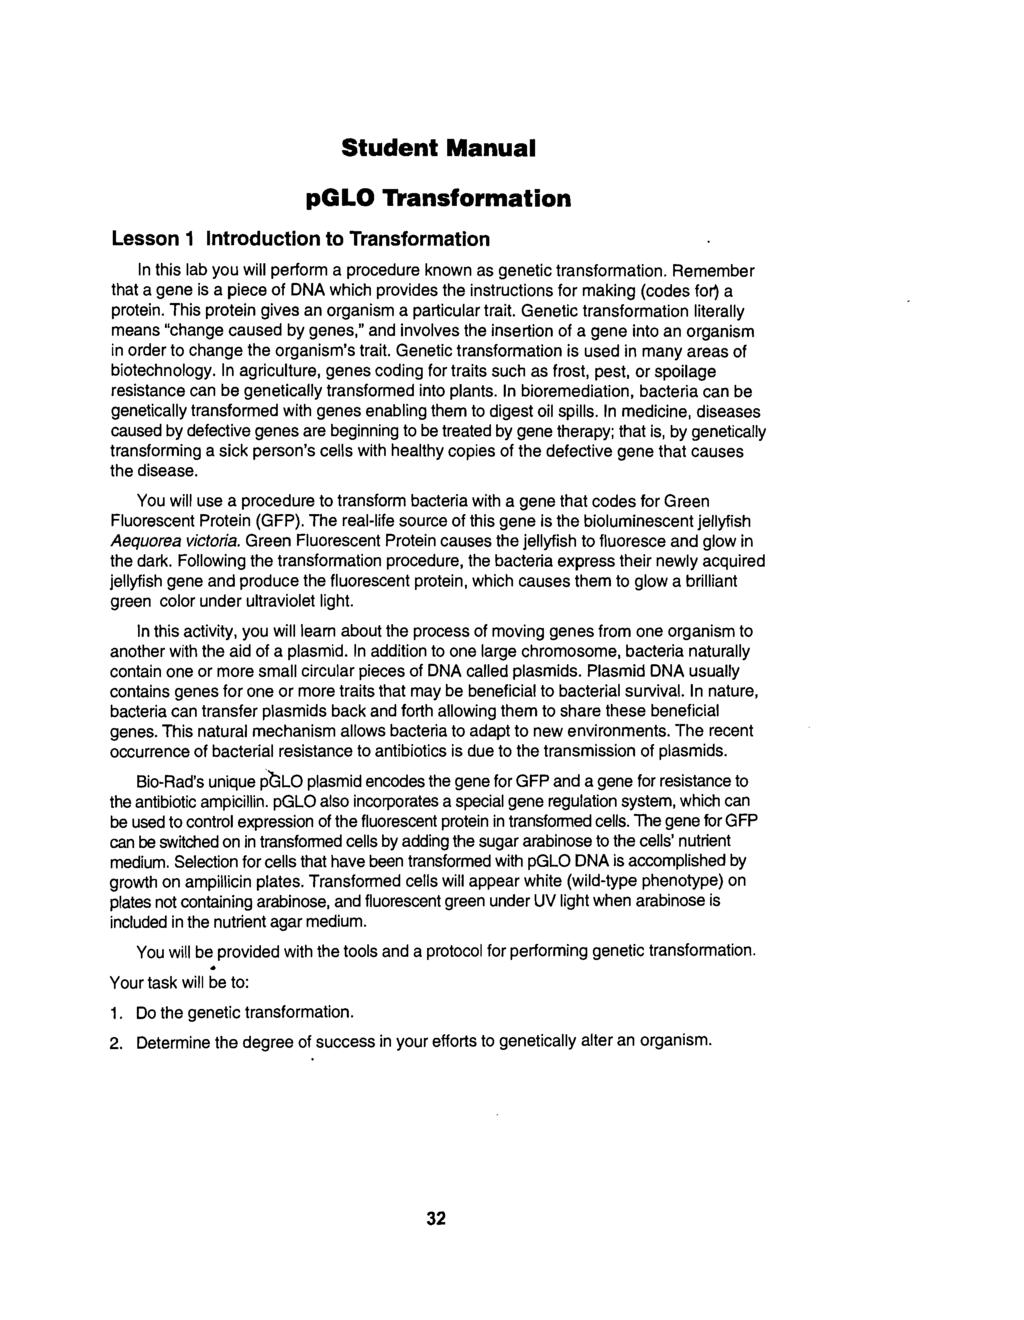 Student Manual pglo mansformation Lesson 1 Introduction to Transformation In this lab you will perform a procedure known as genetic transformation.